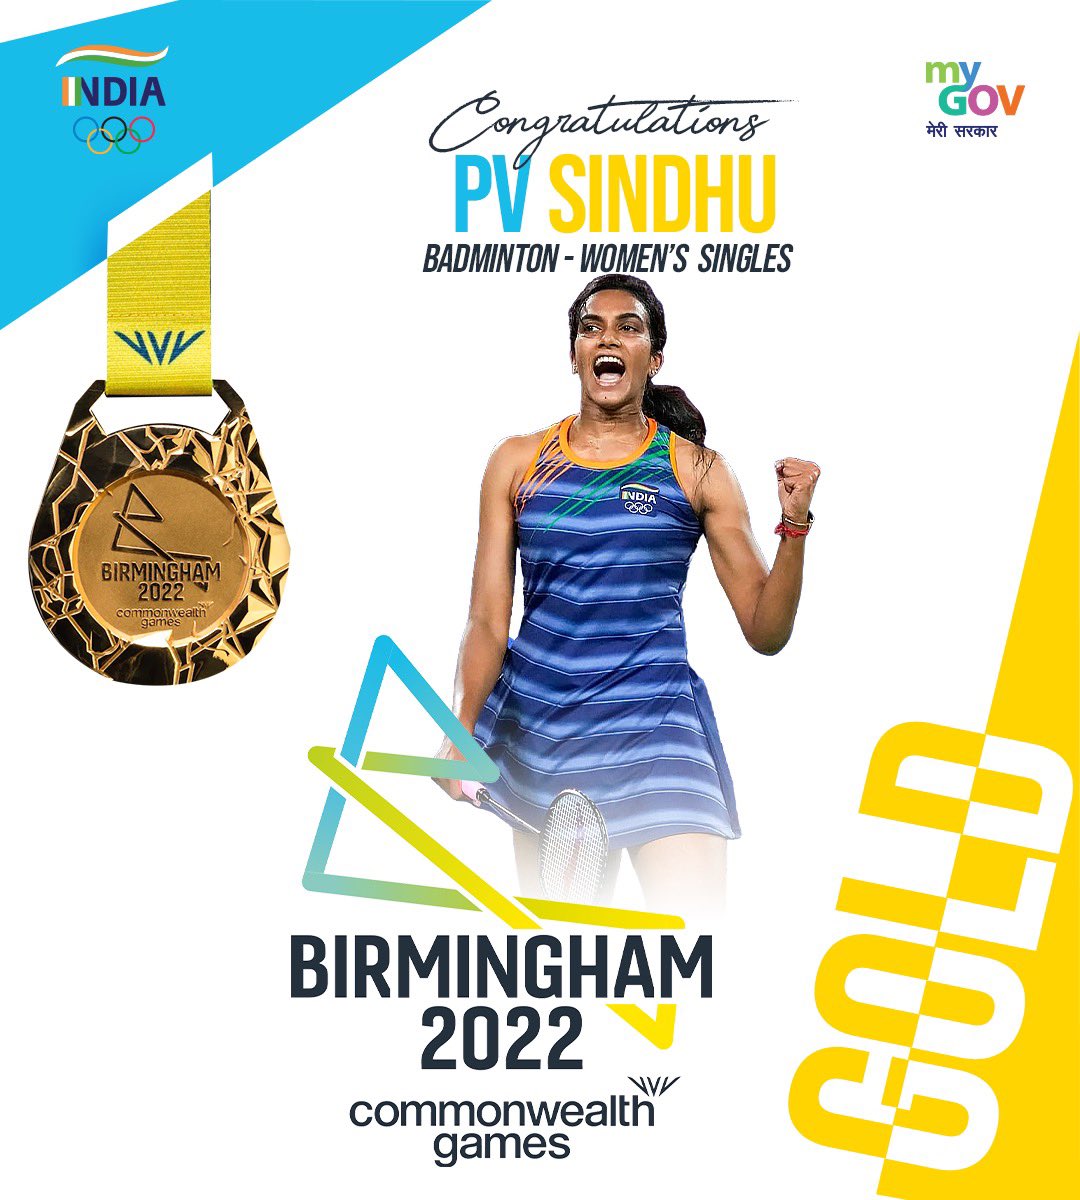 .@Pvsindhu1 🏸 the PRIDE of India🇮🇳 creates history by clinching 🥇 in #CWG2022 Birmingham.

Earlier she won 🥉 in CWG Glasgow 2014, 🥈 in CWG Gold Coast 2018 and now GOLD!

The nation congratulates Sindhu for making India proud once again.

#YuvaShakti #CheerForIndia